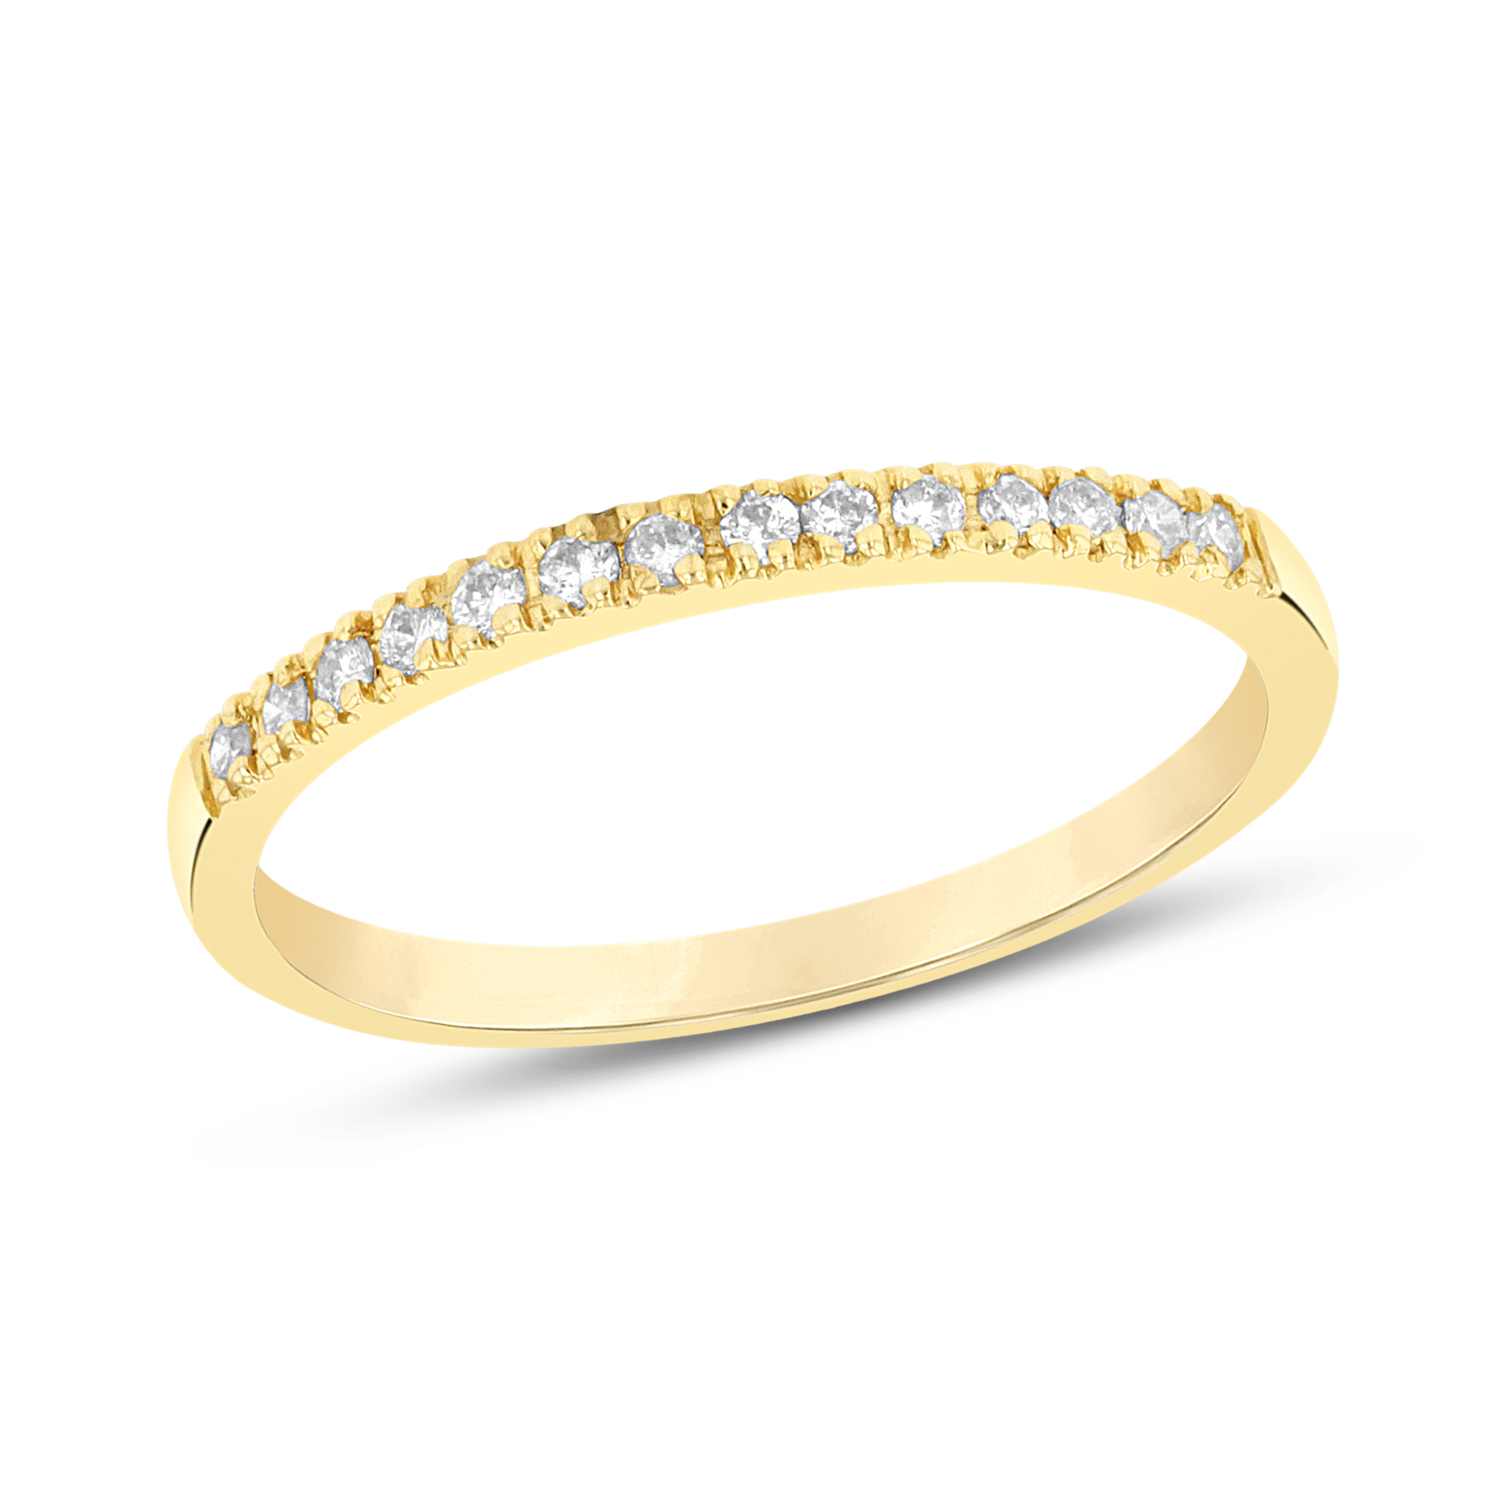 View 0.15ctw Diamond Band in 14k Yellow Gold